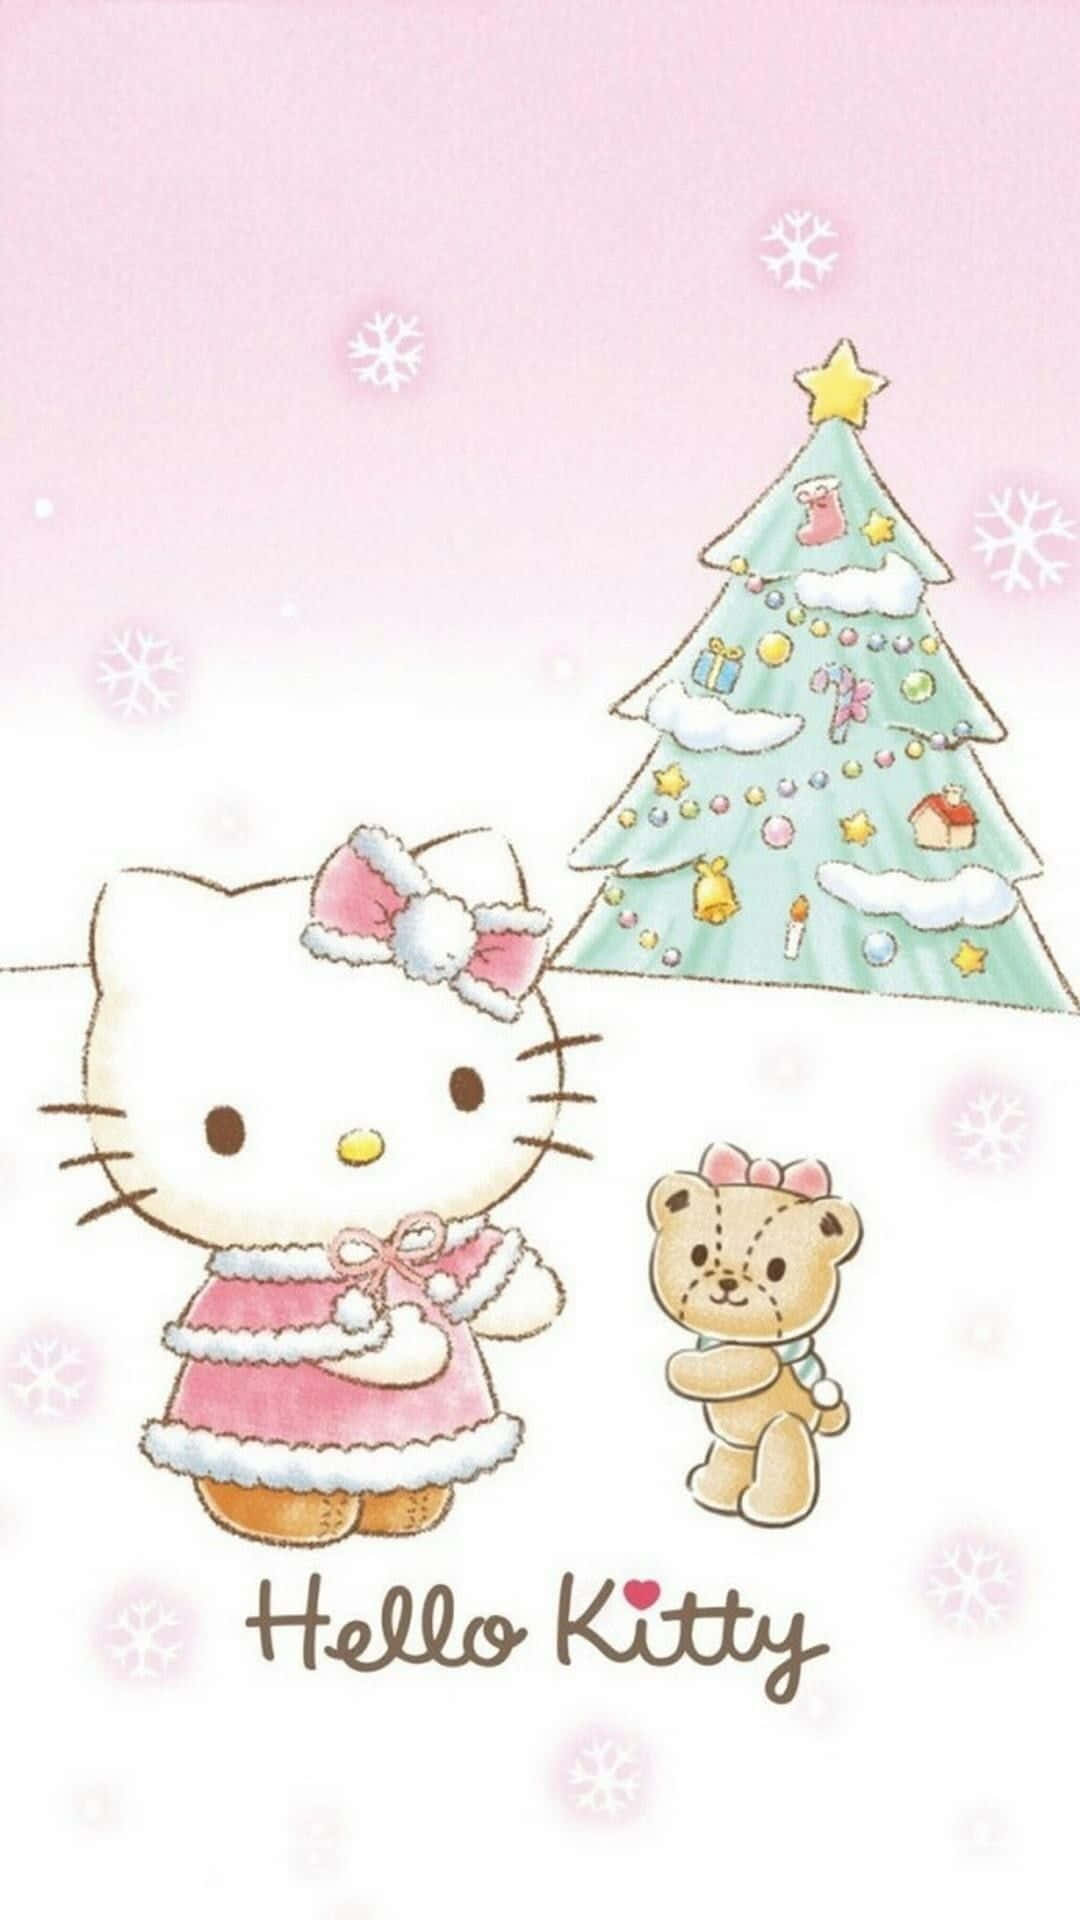 A Festive Hello Kitty In A Santa Hat For The Holidays Wallpaper